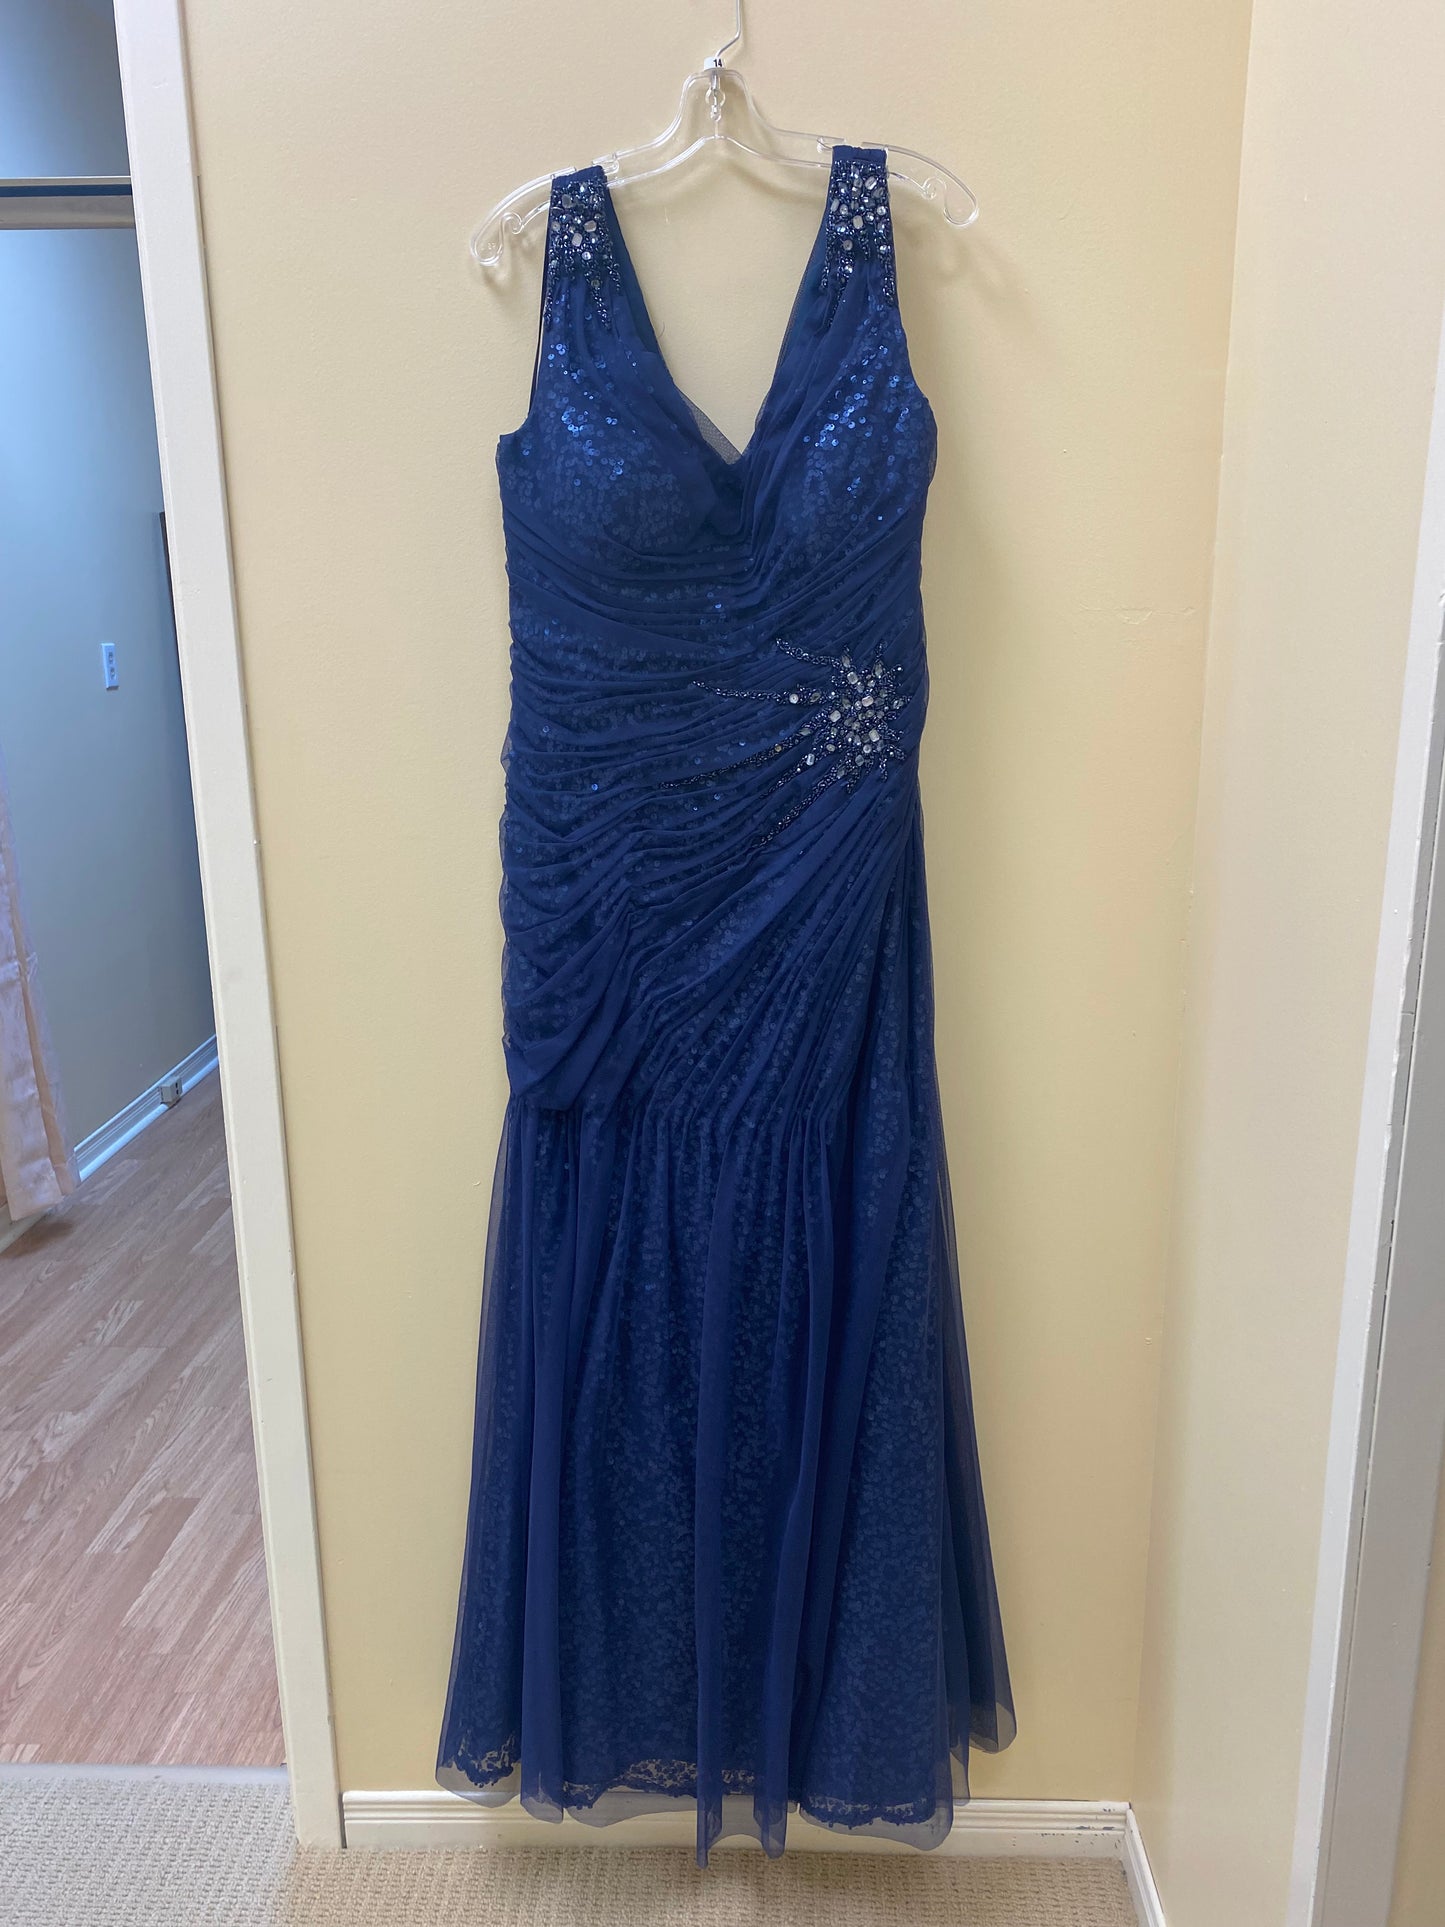 VM COLLECTION - 71118 - Navy Size 14 Long Prom / Mother of the Bride / Bridesmaid Dress